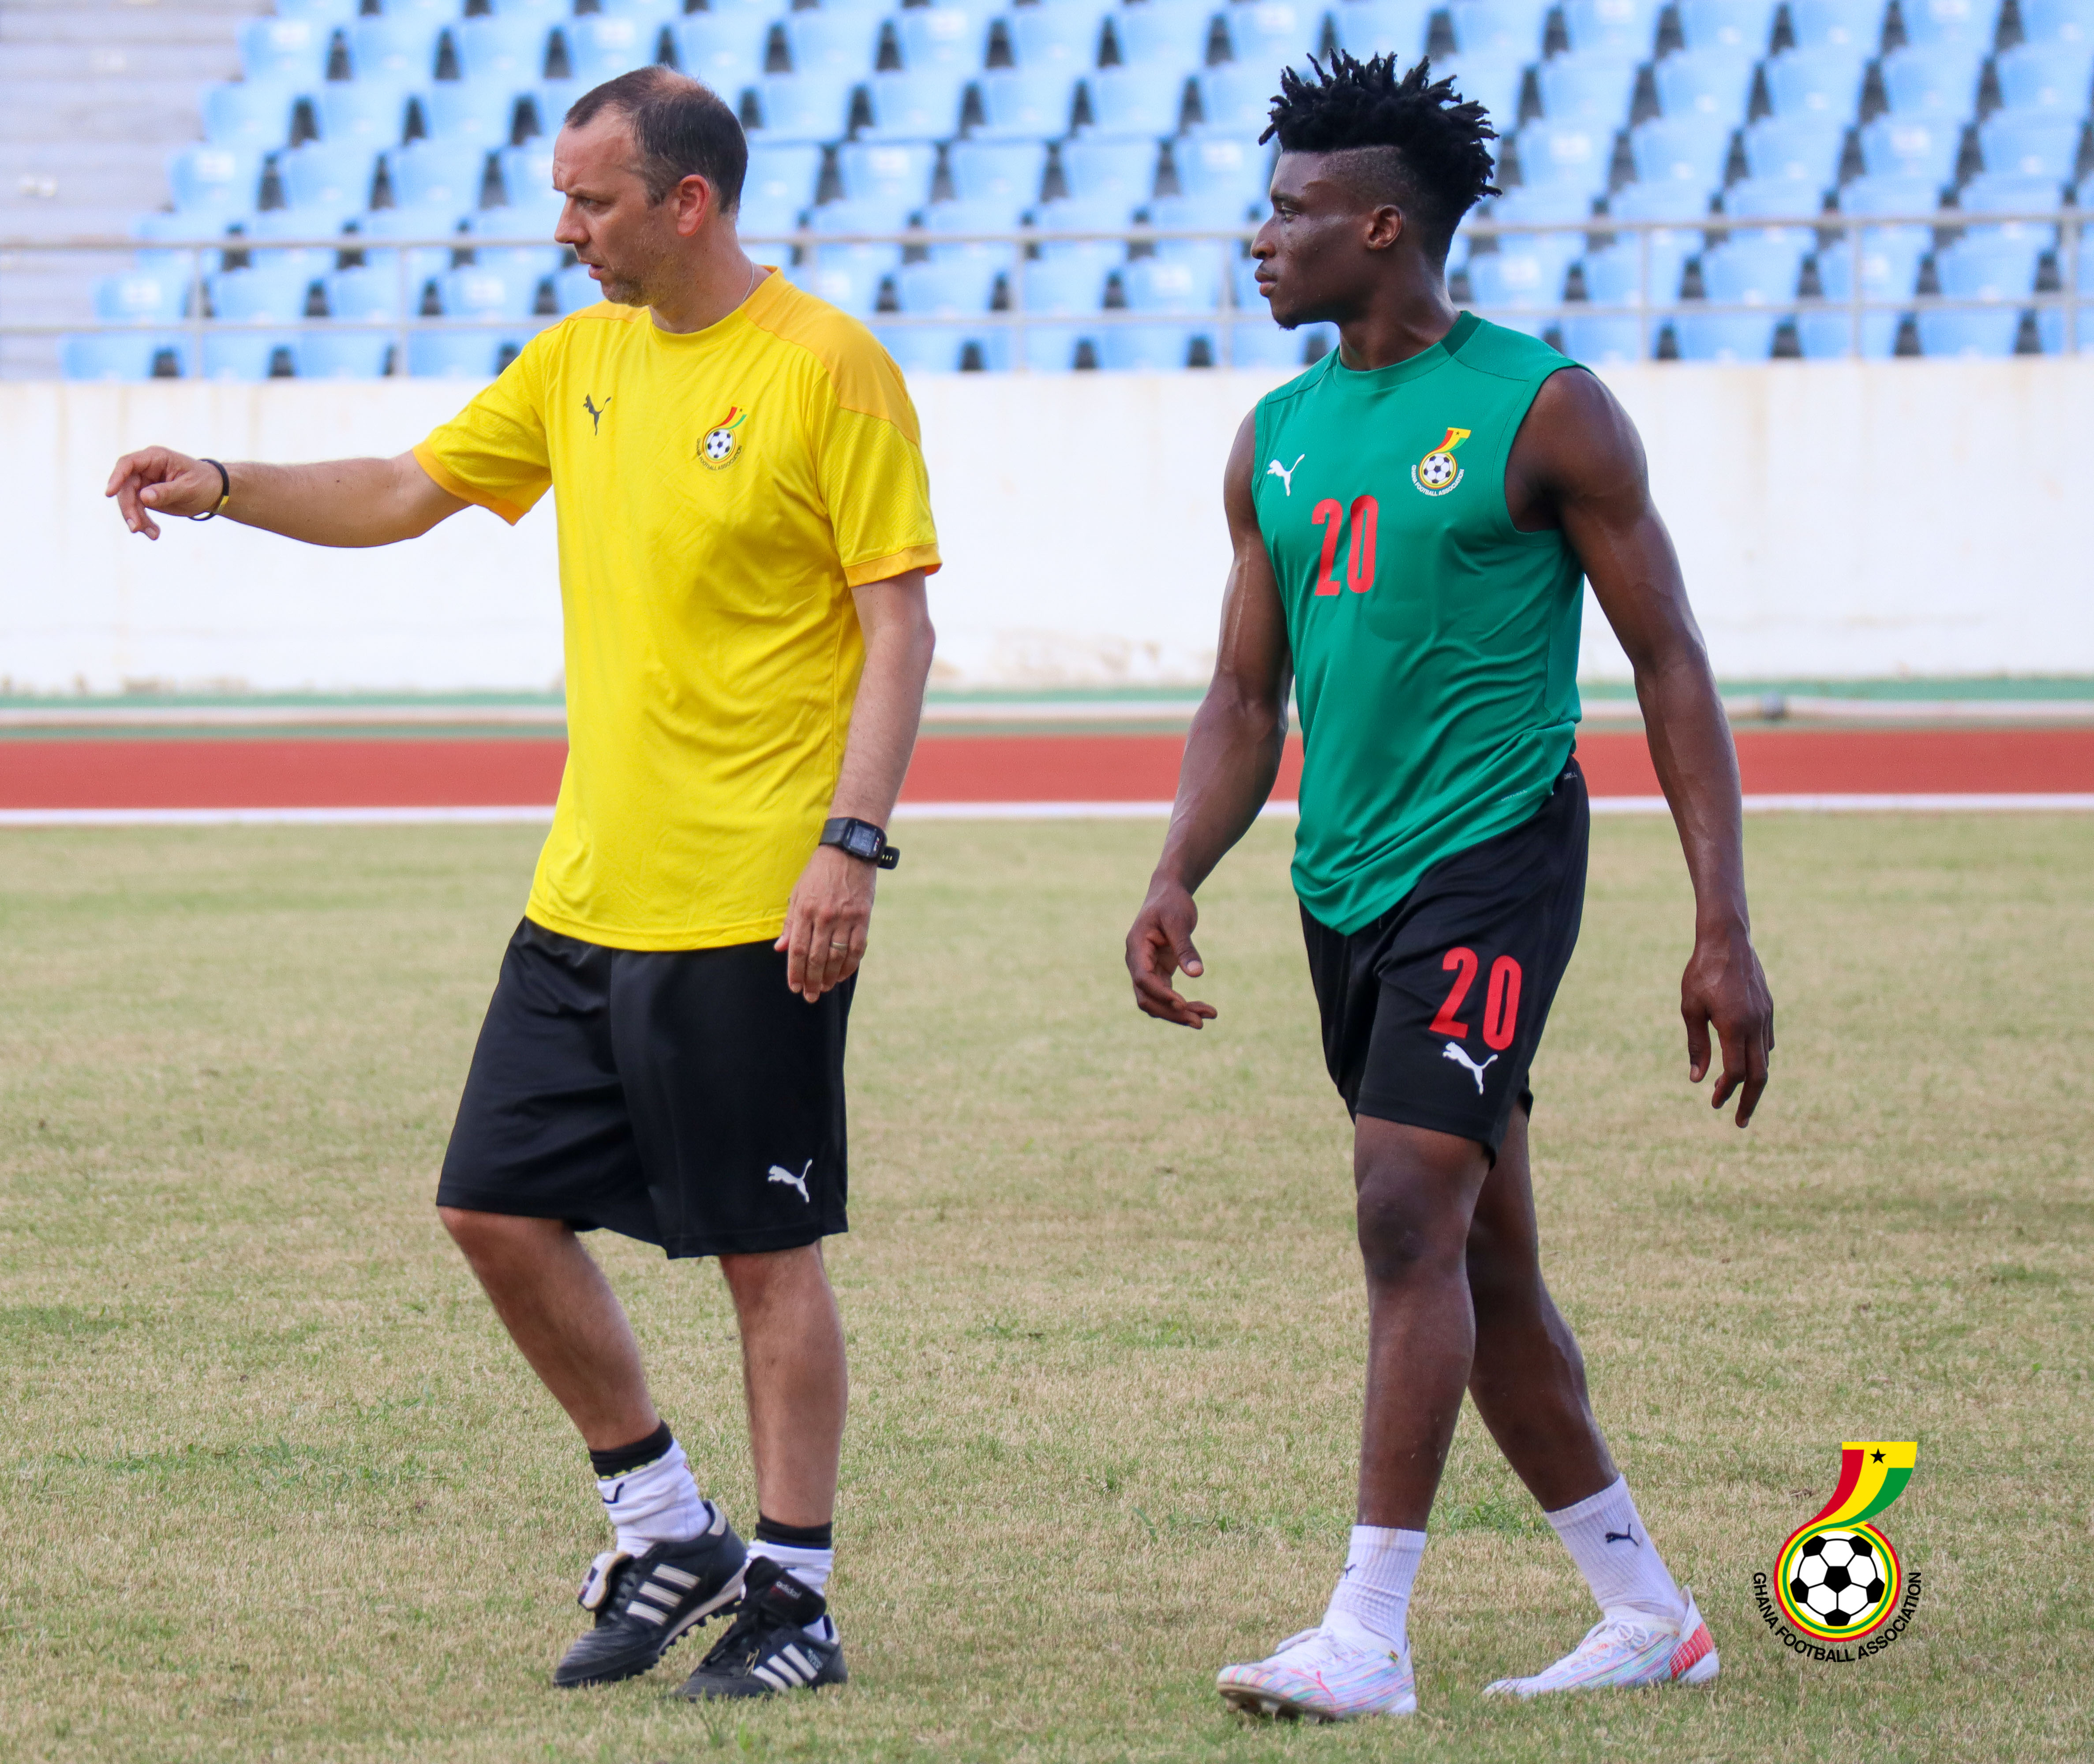 Kudus and Opoku train with colleagues as Stars preparation intensifies ahead of friendlies